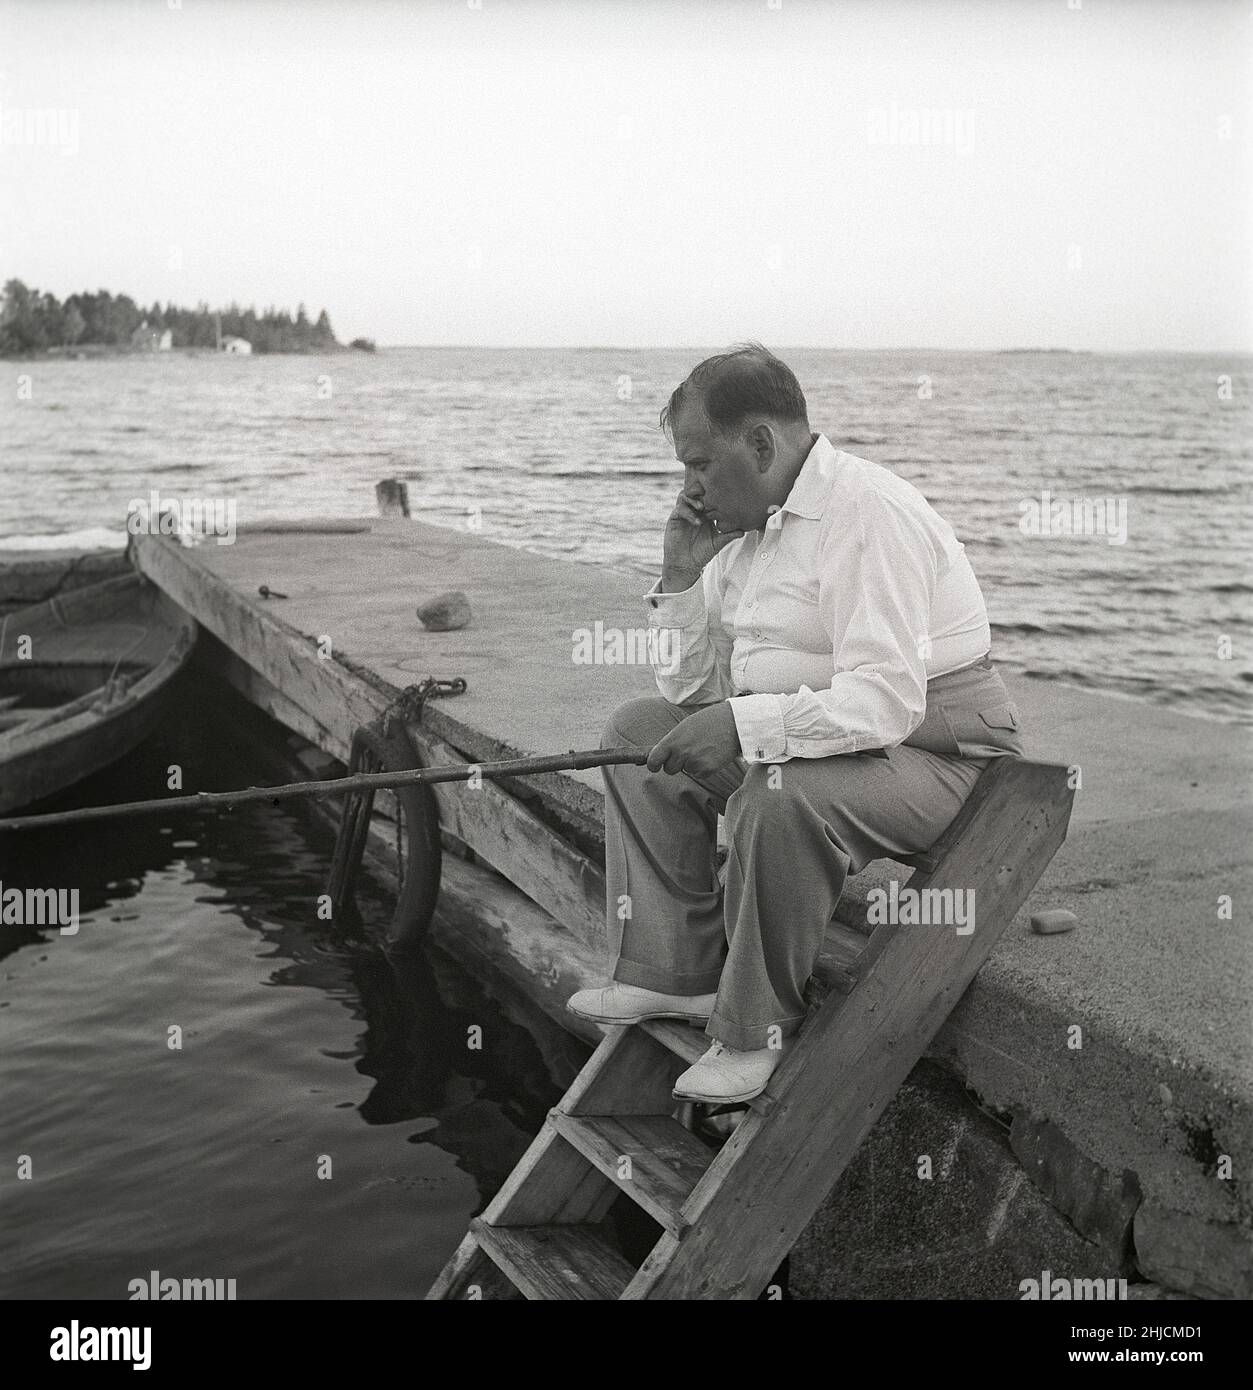 Fishing in the 1940s. A man is sitting by the lake fishing with a rod looking a little bit disapointed that no fish seems to catch. Sweden 1946 Kristoffersson ref V24-4 Stock Photo